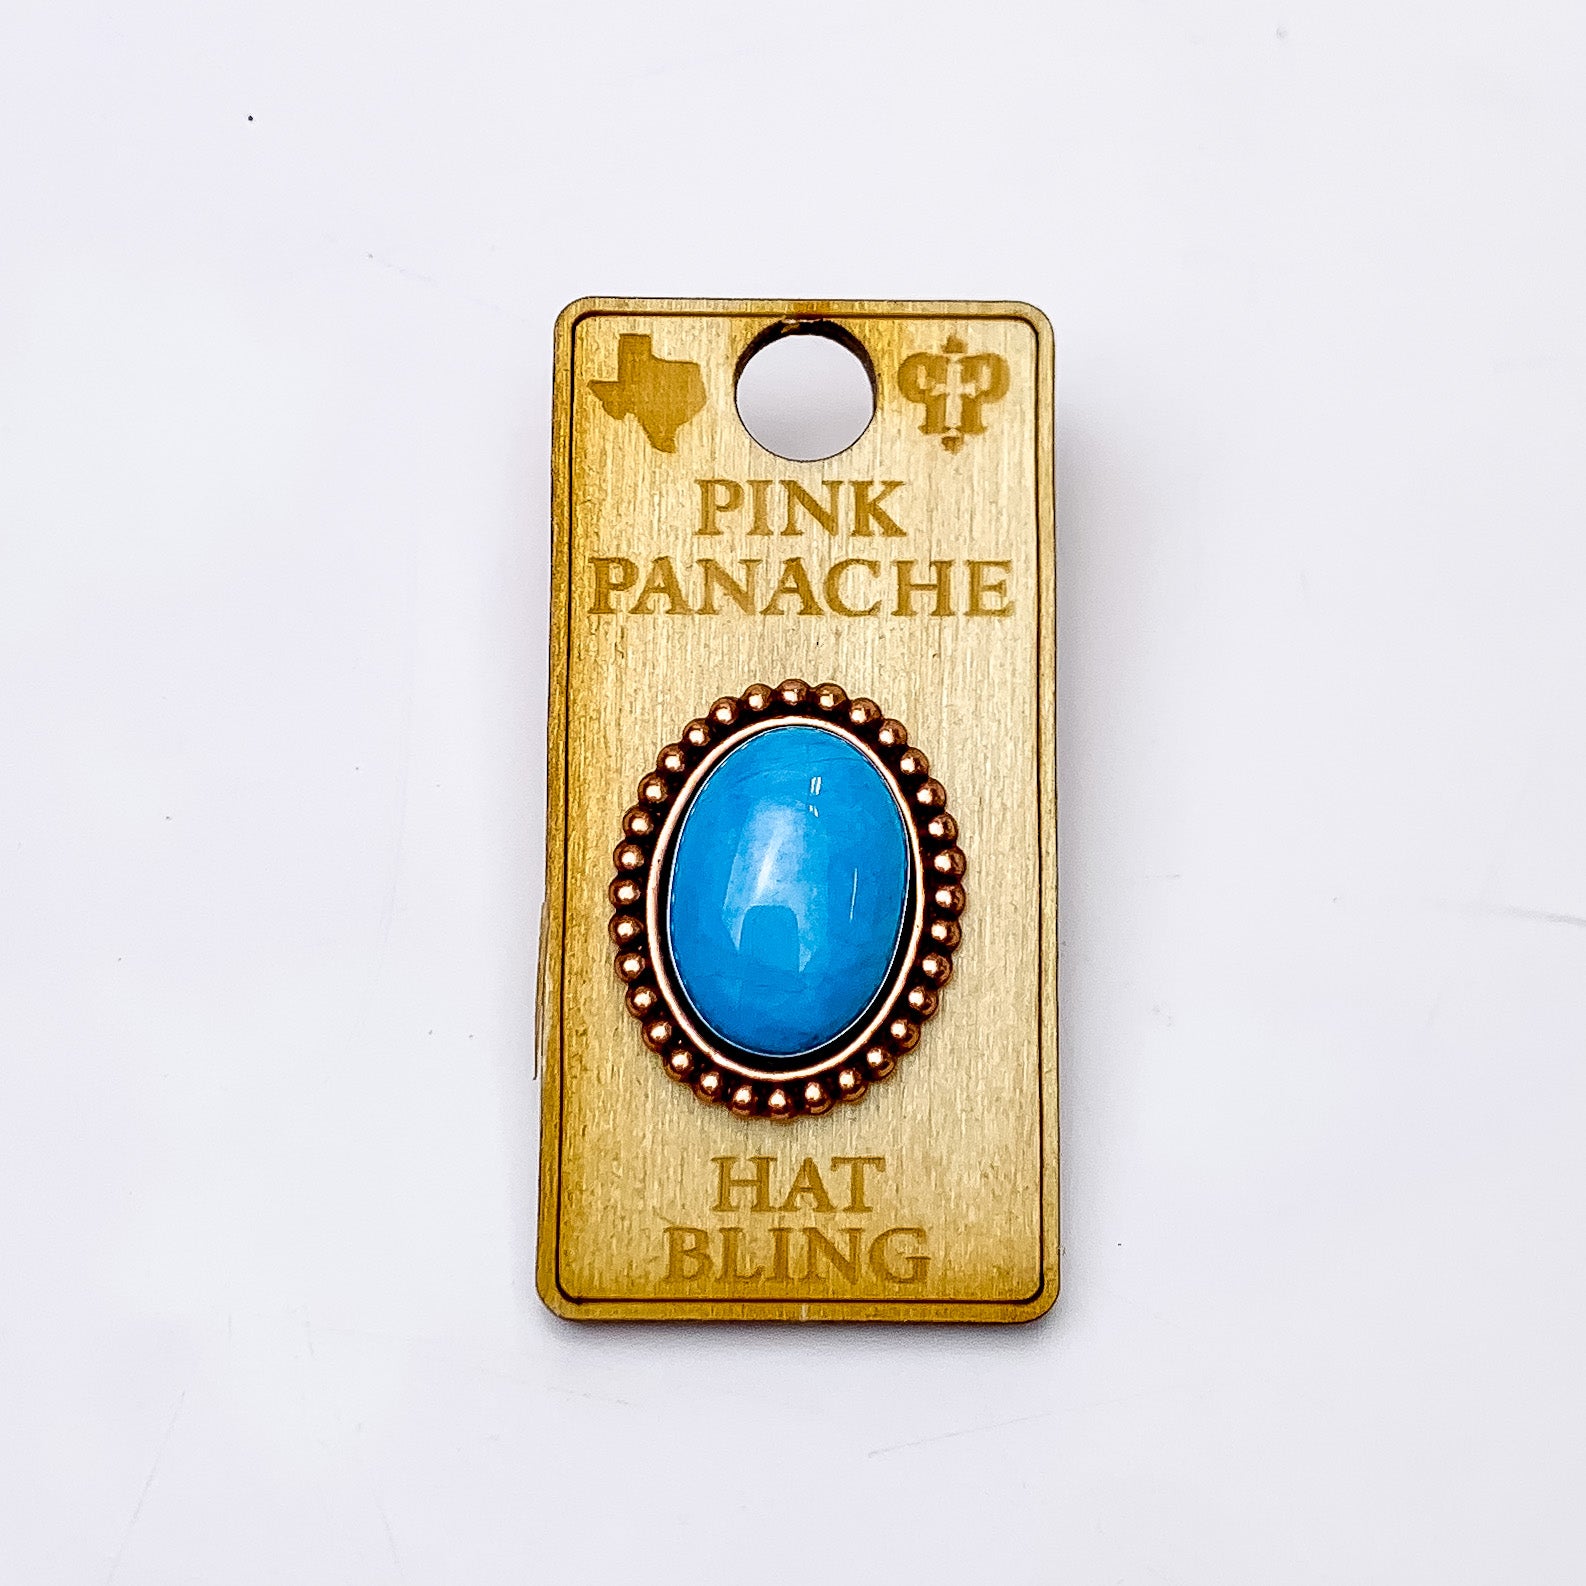 Pink Panache | Rose Gold Tone Oval Hat Pin with Turquoise Cabochon Stone. Pictured on a white background.